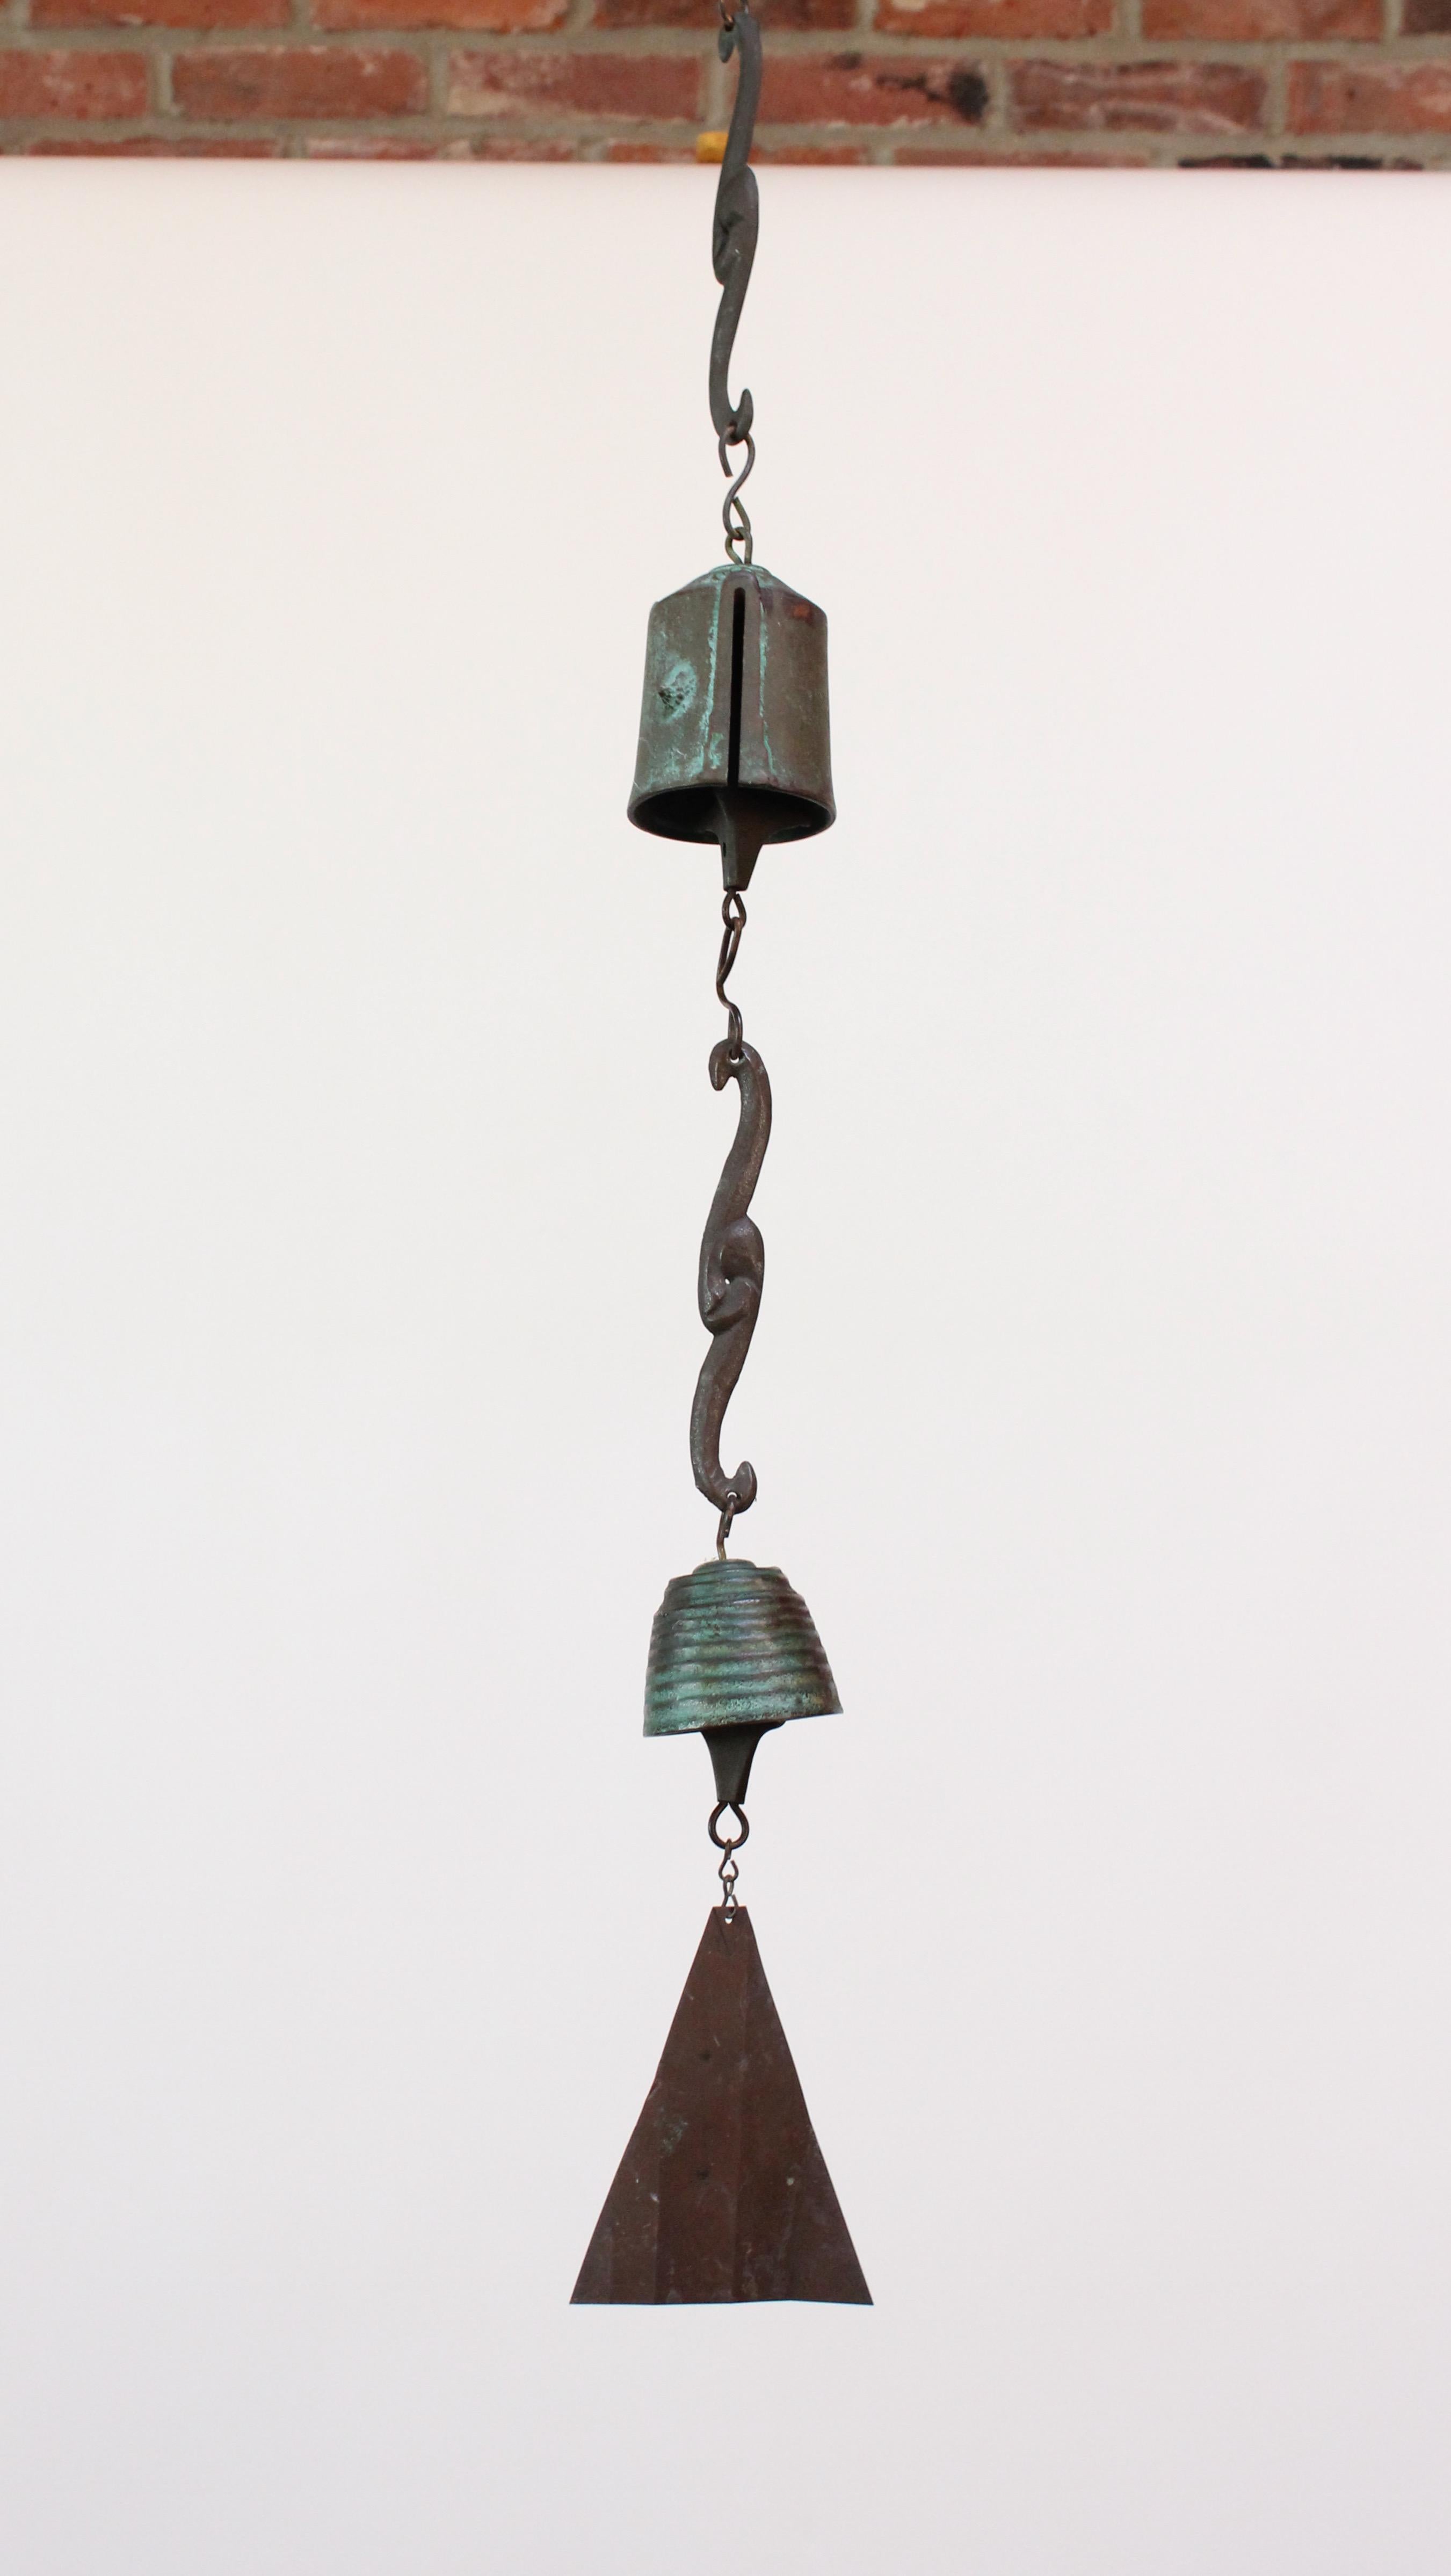 Wind chime / bell designed by Jeffrey Cross for Harmony Hollow Bell Works ca. 1970. 
Bronze cast elements with verdigris patina throughout from natural age and environmental weathering. 
Incised HHBW signature present to the tops of both bells.